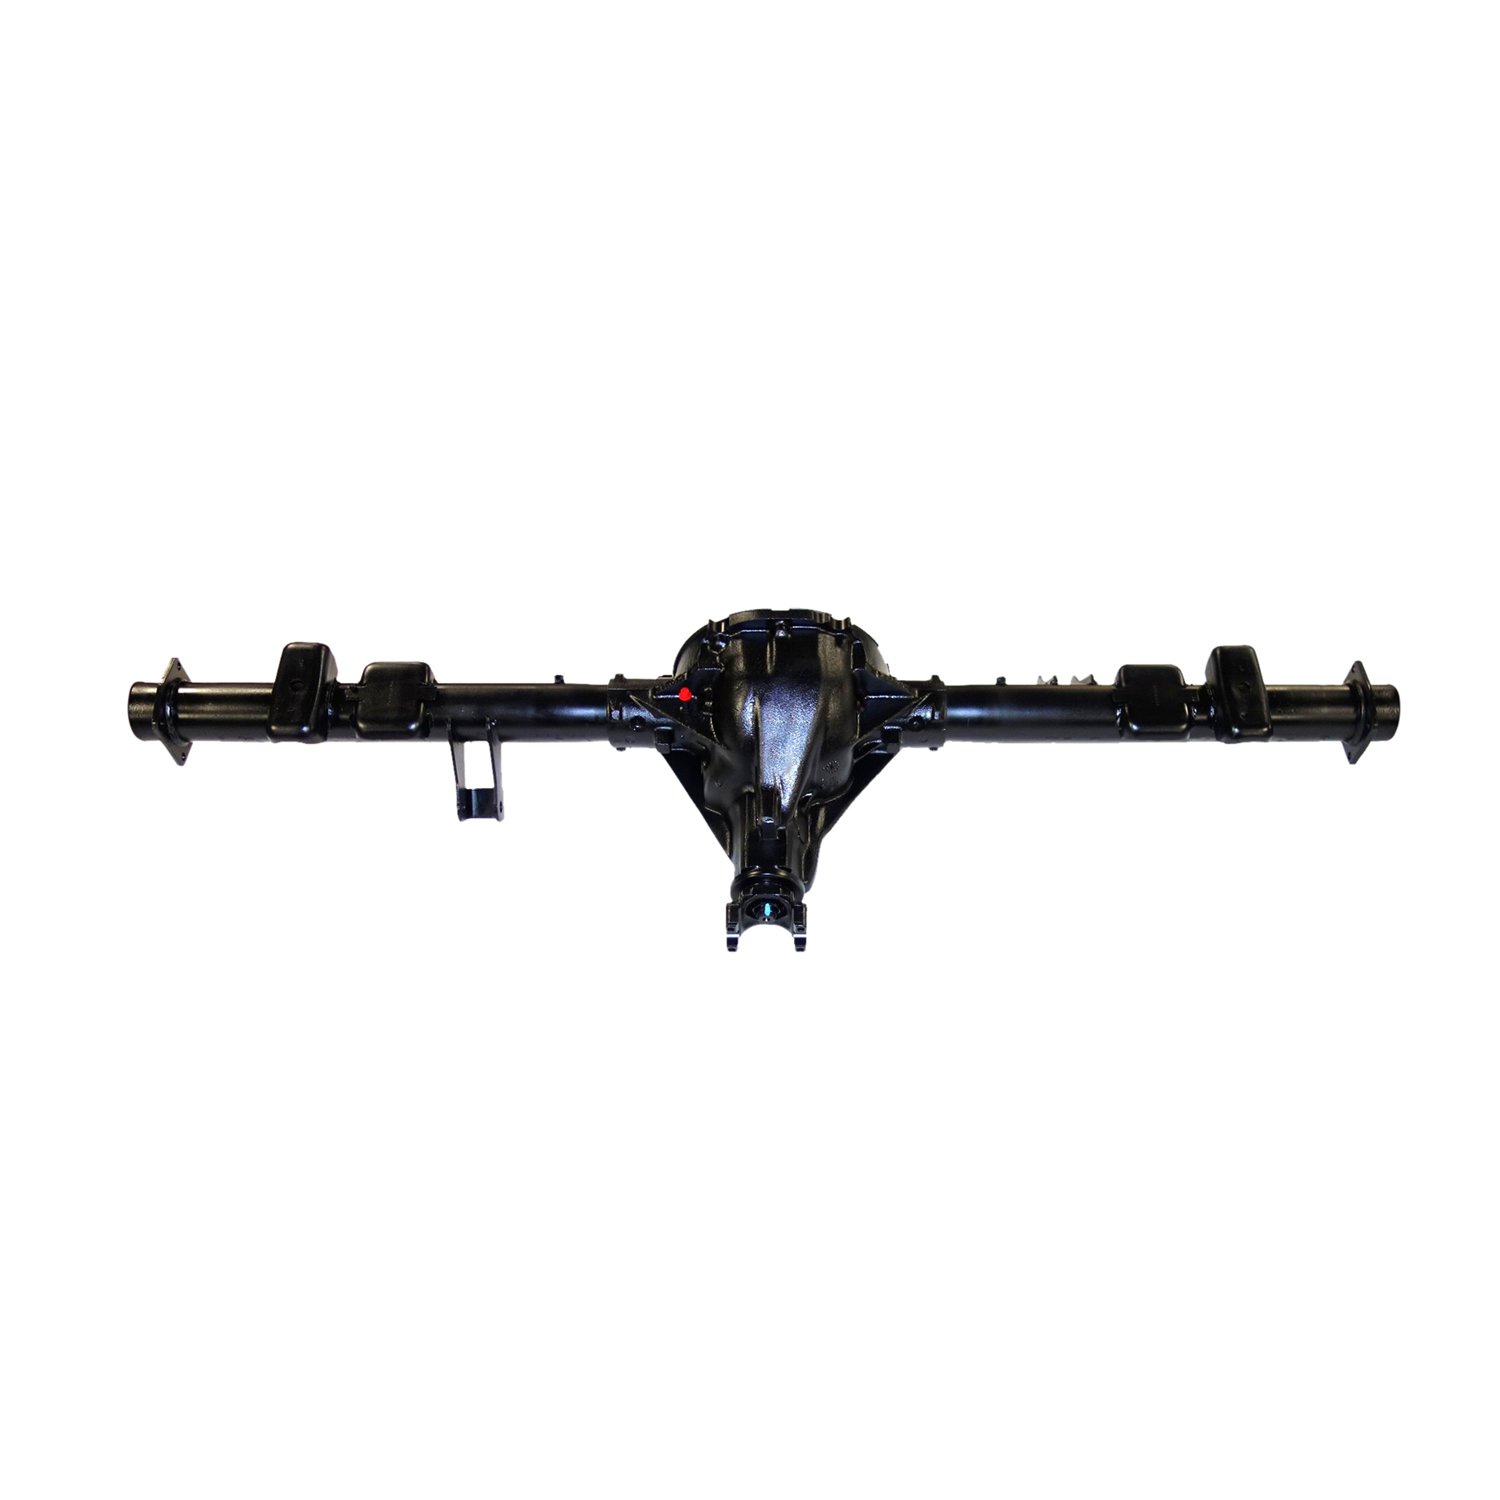 Remanufactured Complete Axle Assy for GM 8.5" 88-99 GMC 1500 Pickup 4.11 , 2wd, Posi LSD